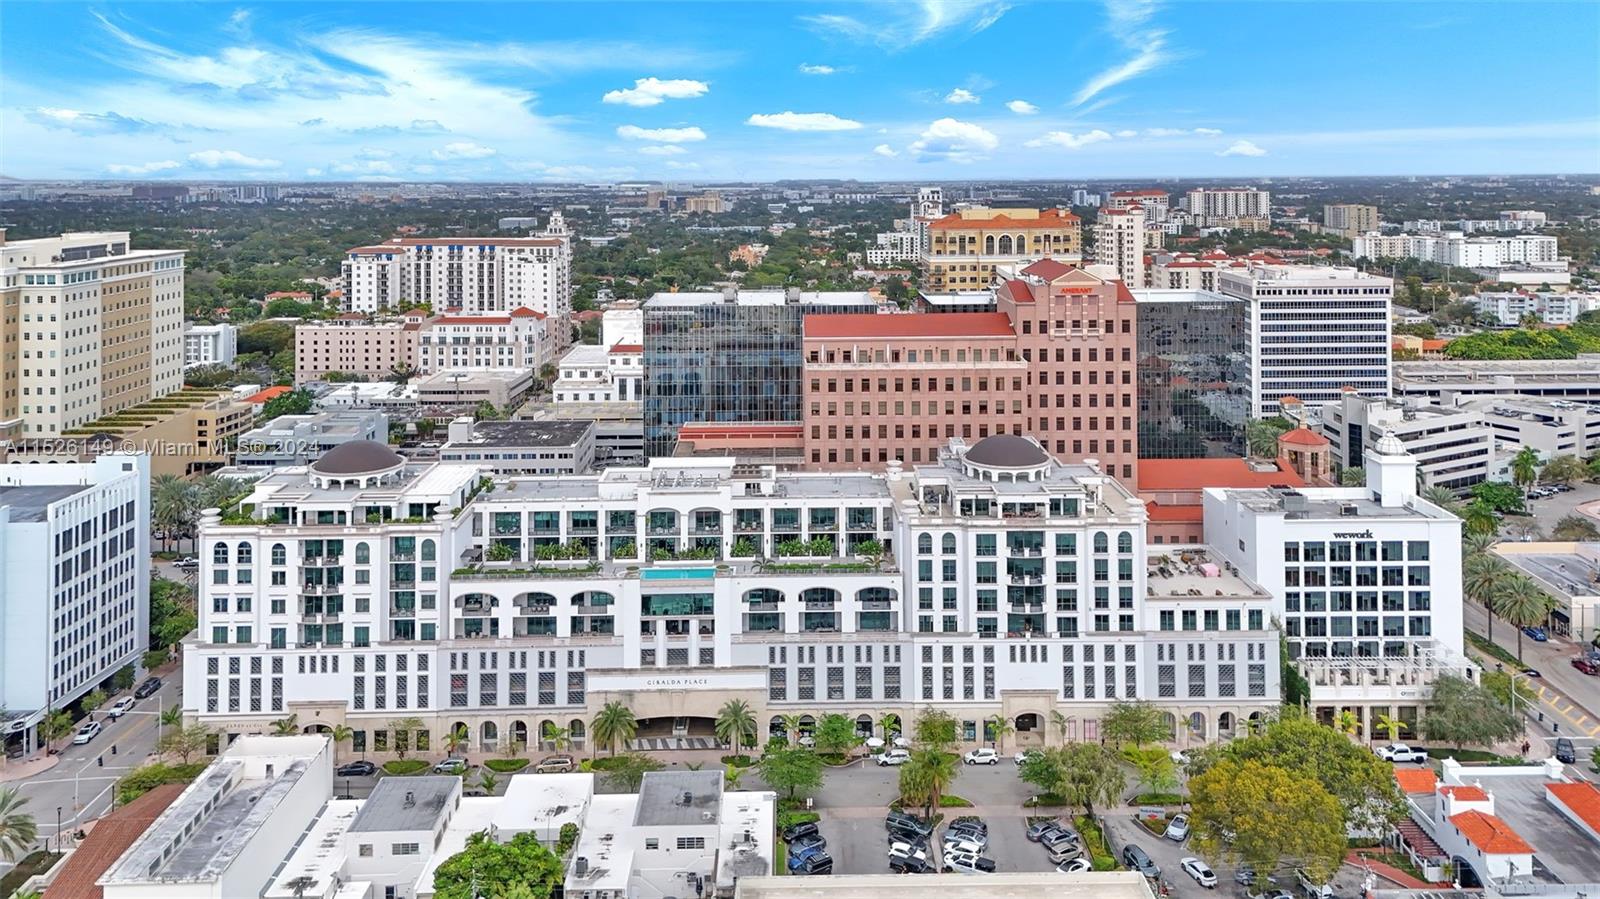 Discover luxurious living in the heart of Coral Gables with these two unique condos seamlessly combined into one phenomenal space (4,986 SF). This property is a true sanctuary, boasting 11-ft. ceilings, four balconies, a private elevator foyer, two kitchens, equipped with state-of-the-art Wolf & Subzero appliances, dining, living & family (or game) rooms & a den. The Master Suite with double the square footage, is an exceptional retreat with a separate area creating an array of design possibilities. Whether a personal gym, office, or home yoga studio, the area can be customized to suit your lifestyle. We’ve left the flooring unfinished, allowing you the opportunity to personalize the space to your liking. Enjoy all the comforts of a house while experiencing the luxury of condominium living